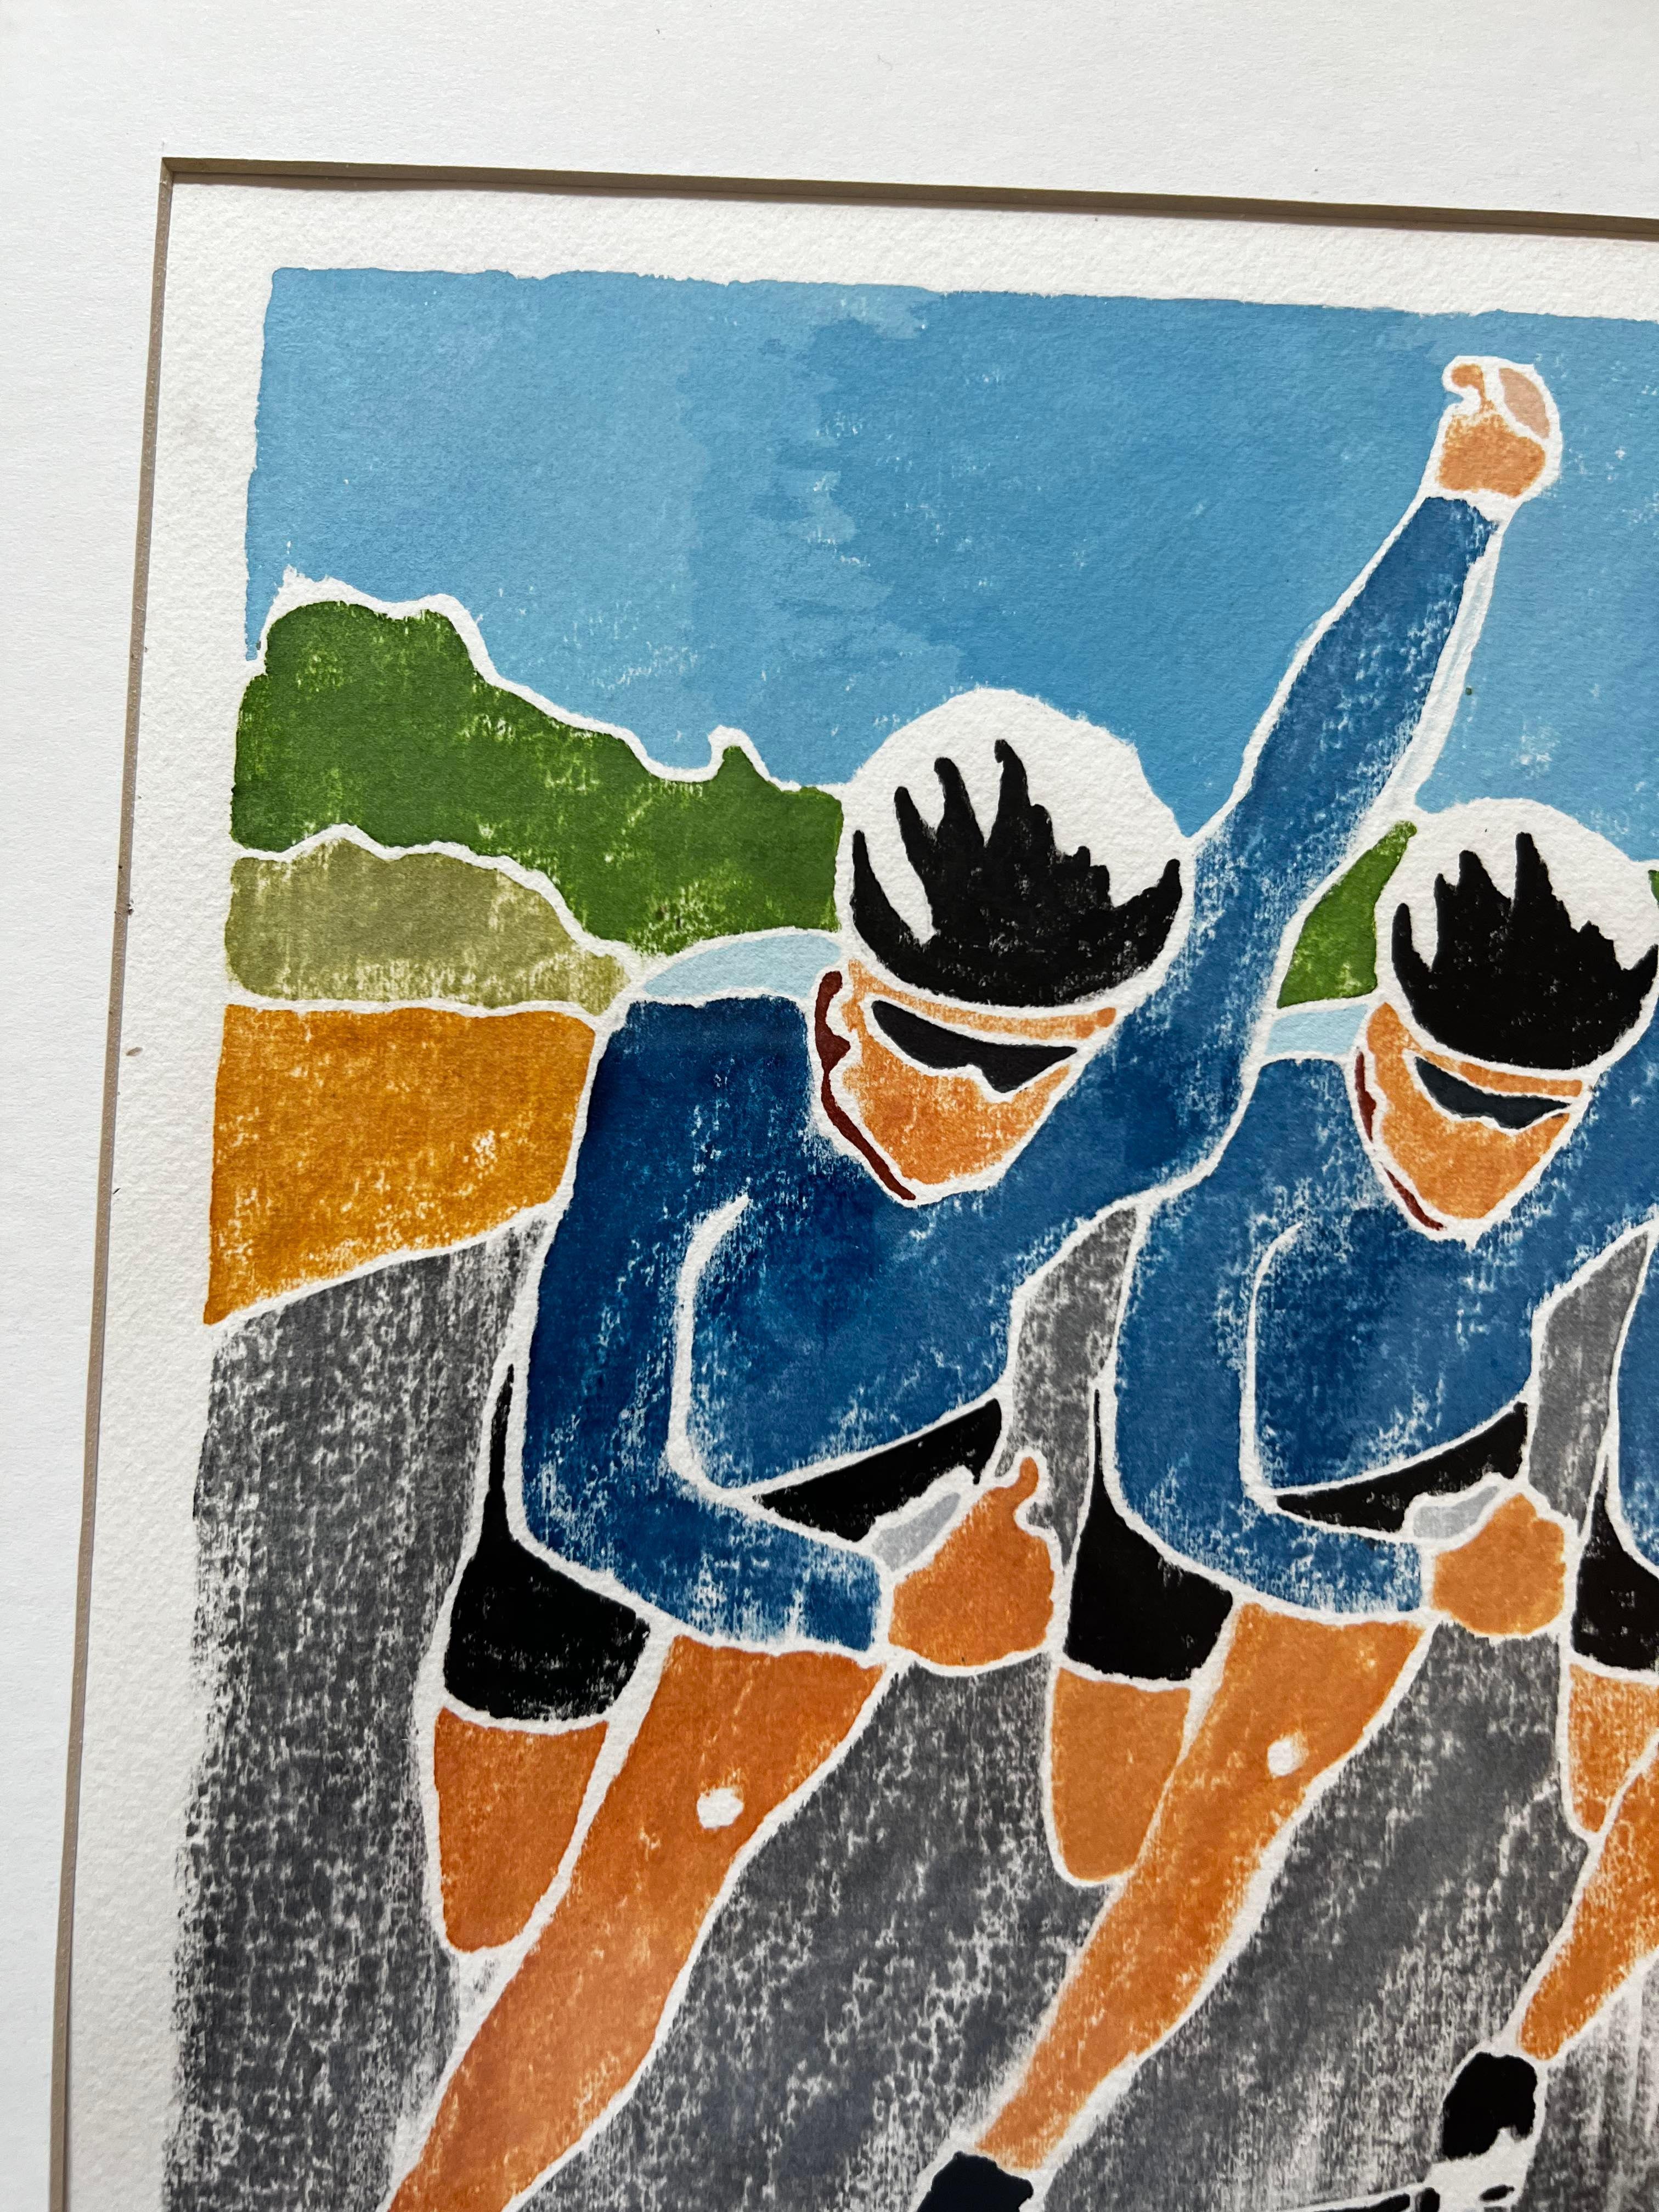 This color woodblock print is of three skaters skating down a road. The skaters are skating in the exact same position, but are in different locations on the pictorial space, simulating movement across the piece. Athleticism is a theme often